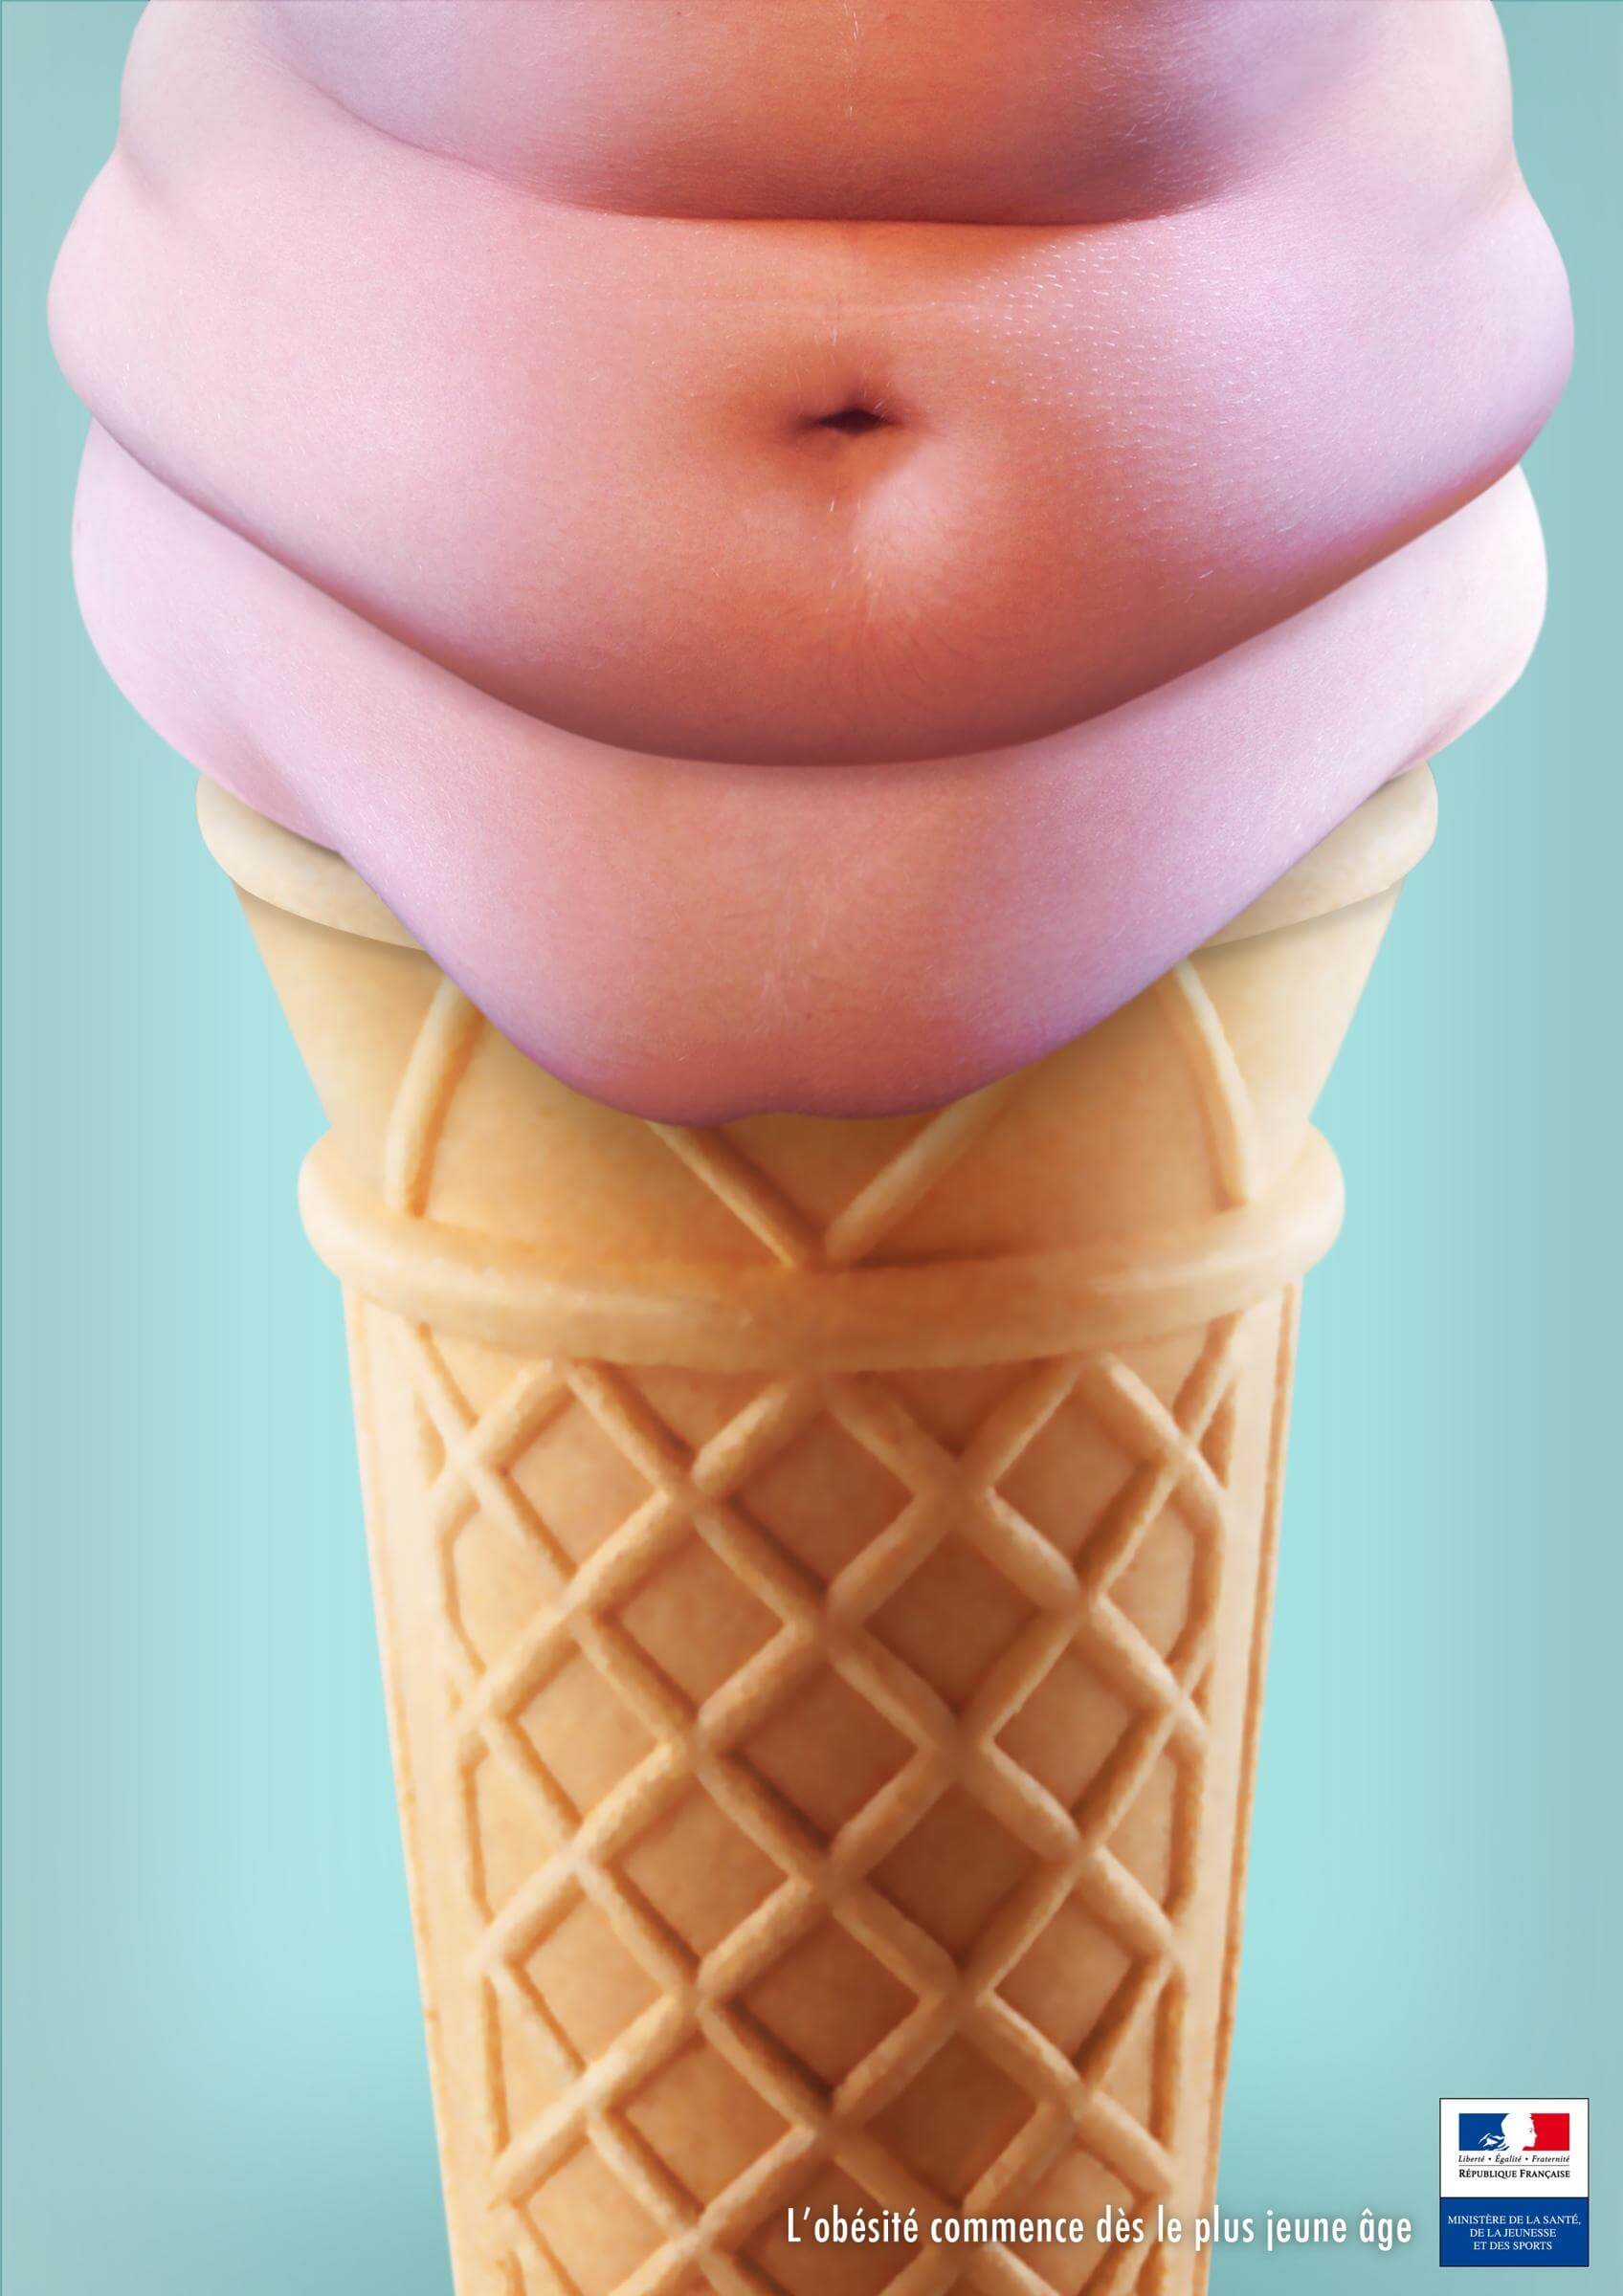 French Ministry of Health-Childhood Obesity